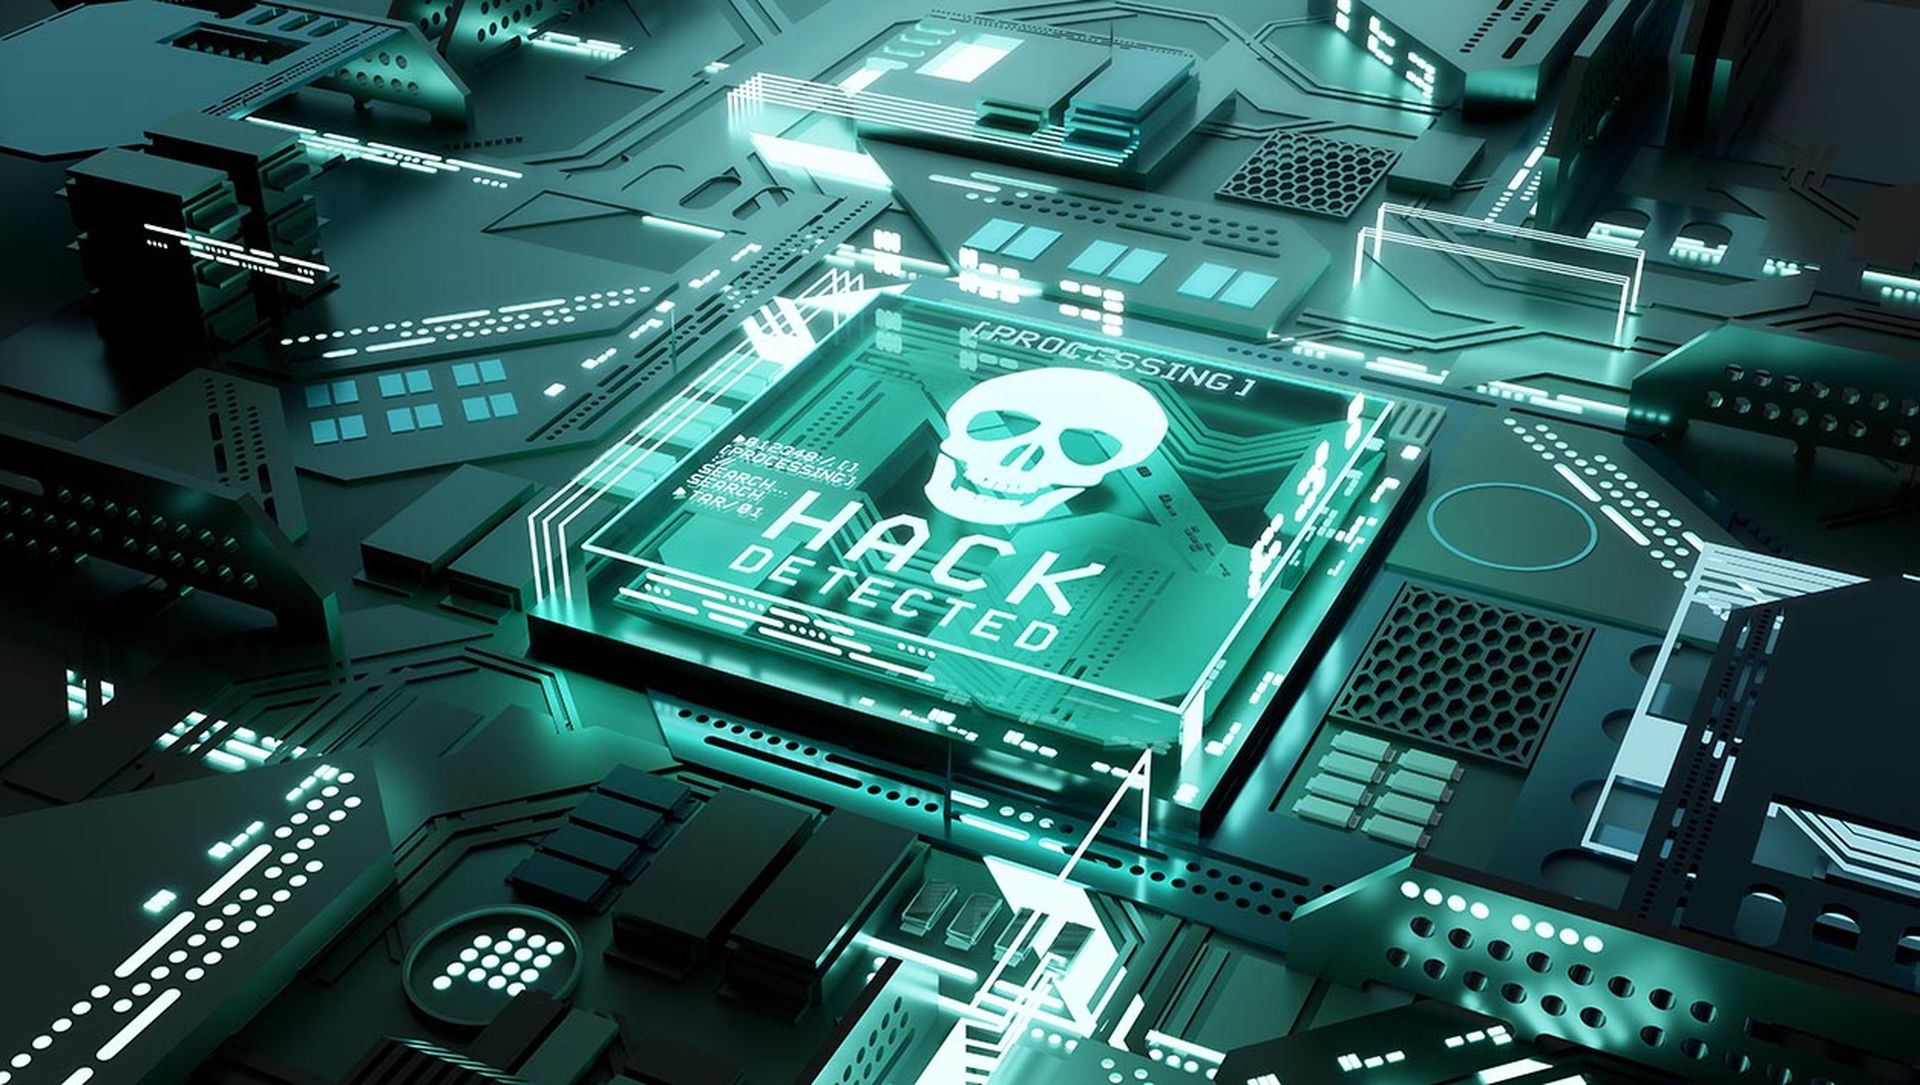 Hacking technology. Network ransomware and cyber crimes concept - 3d illustration.